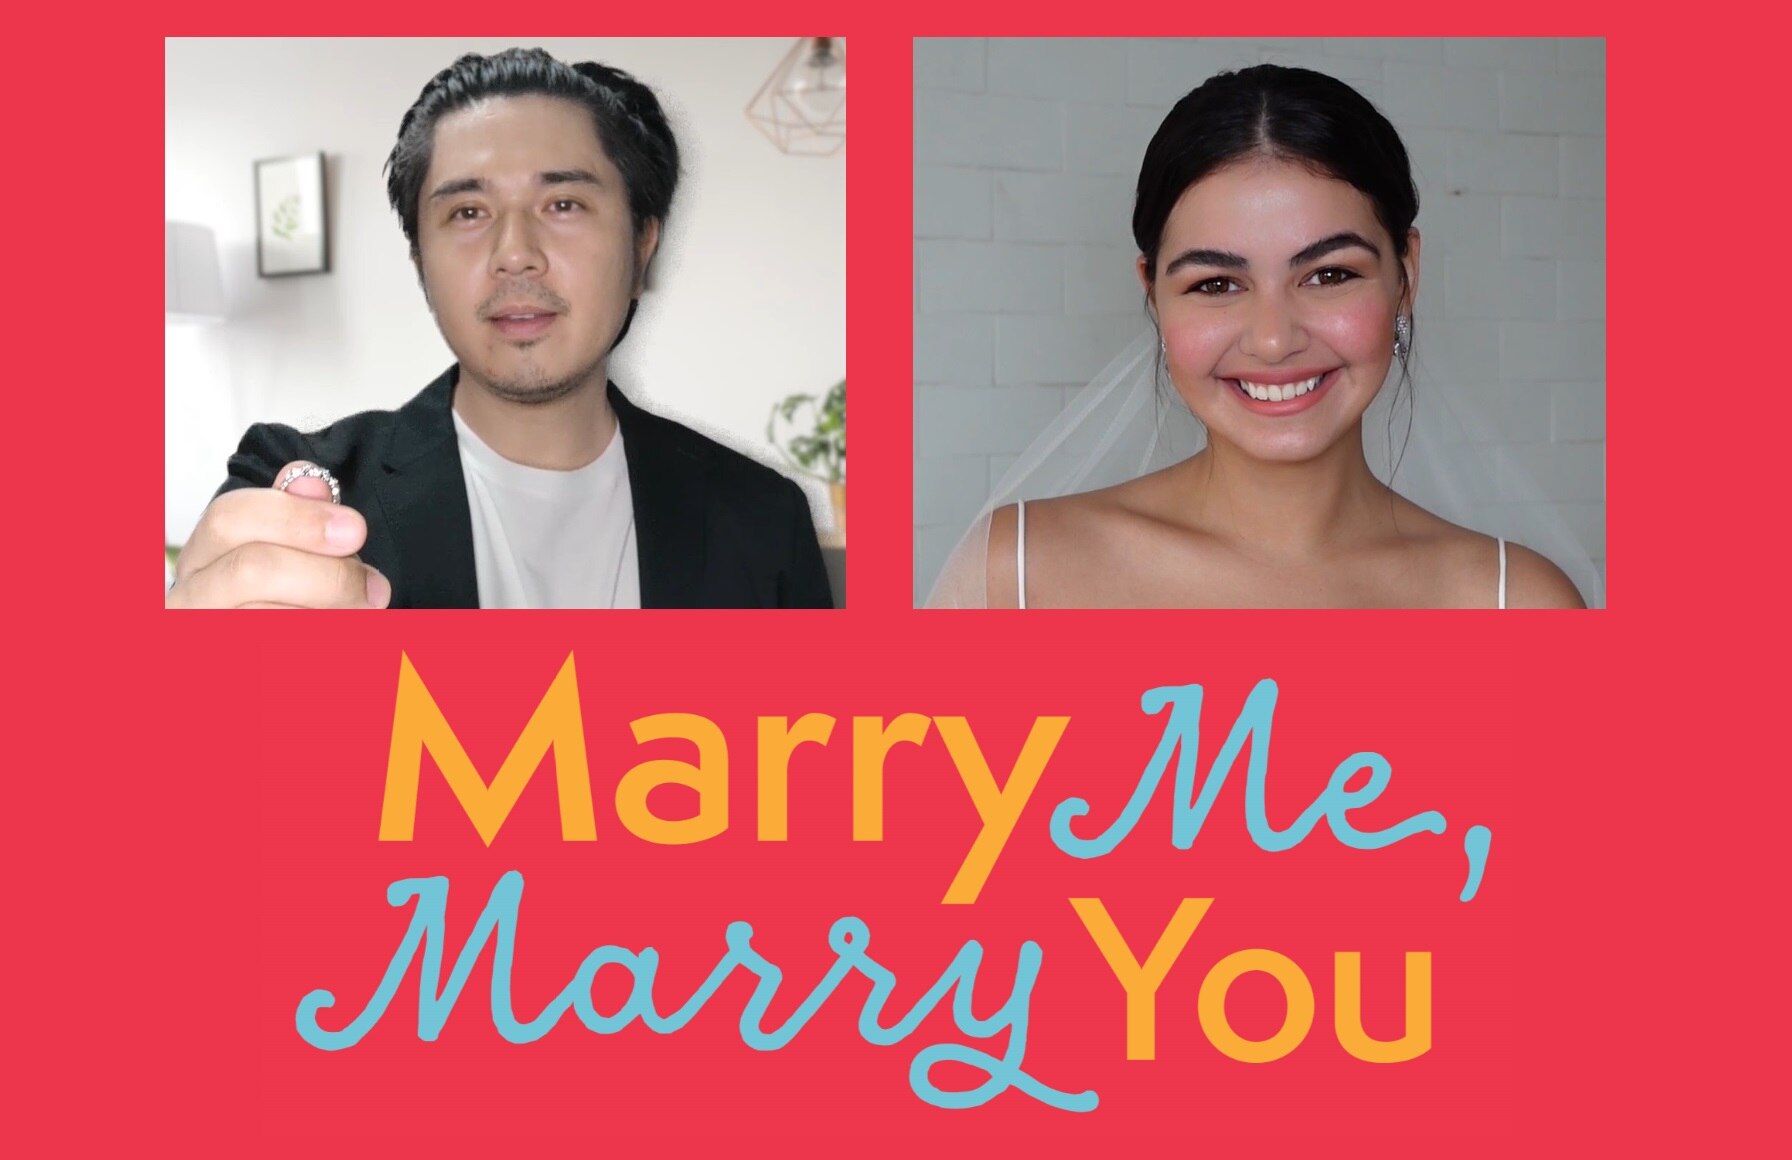 Paulo and Janine team up in ABS-CBN’s “Marry Me, Marry You"